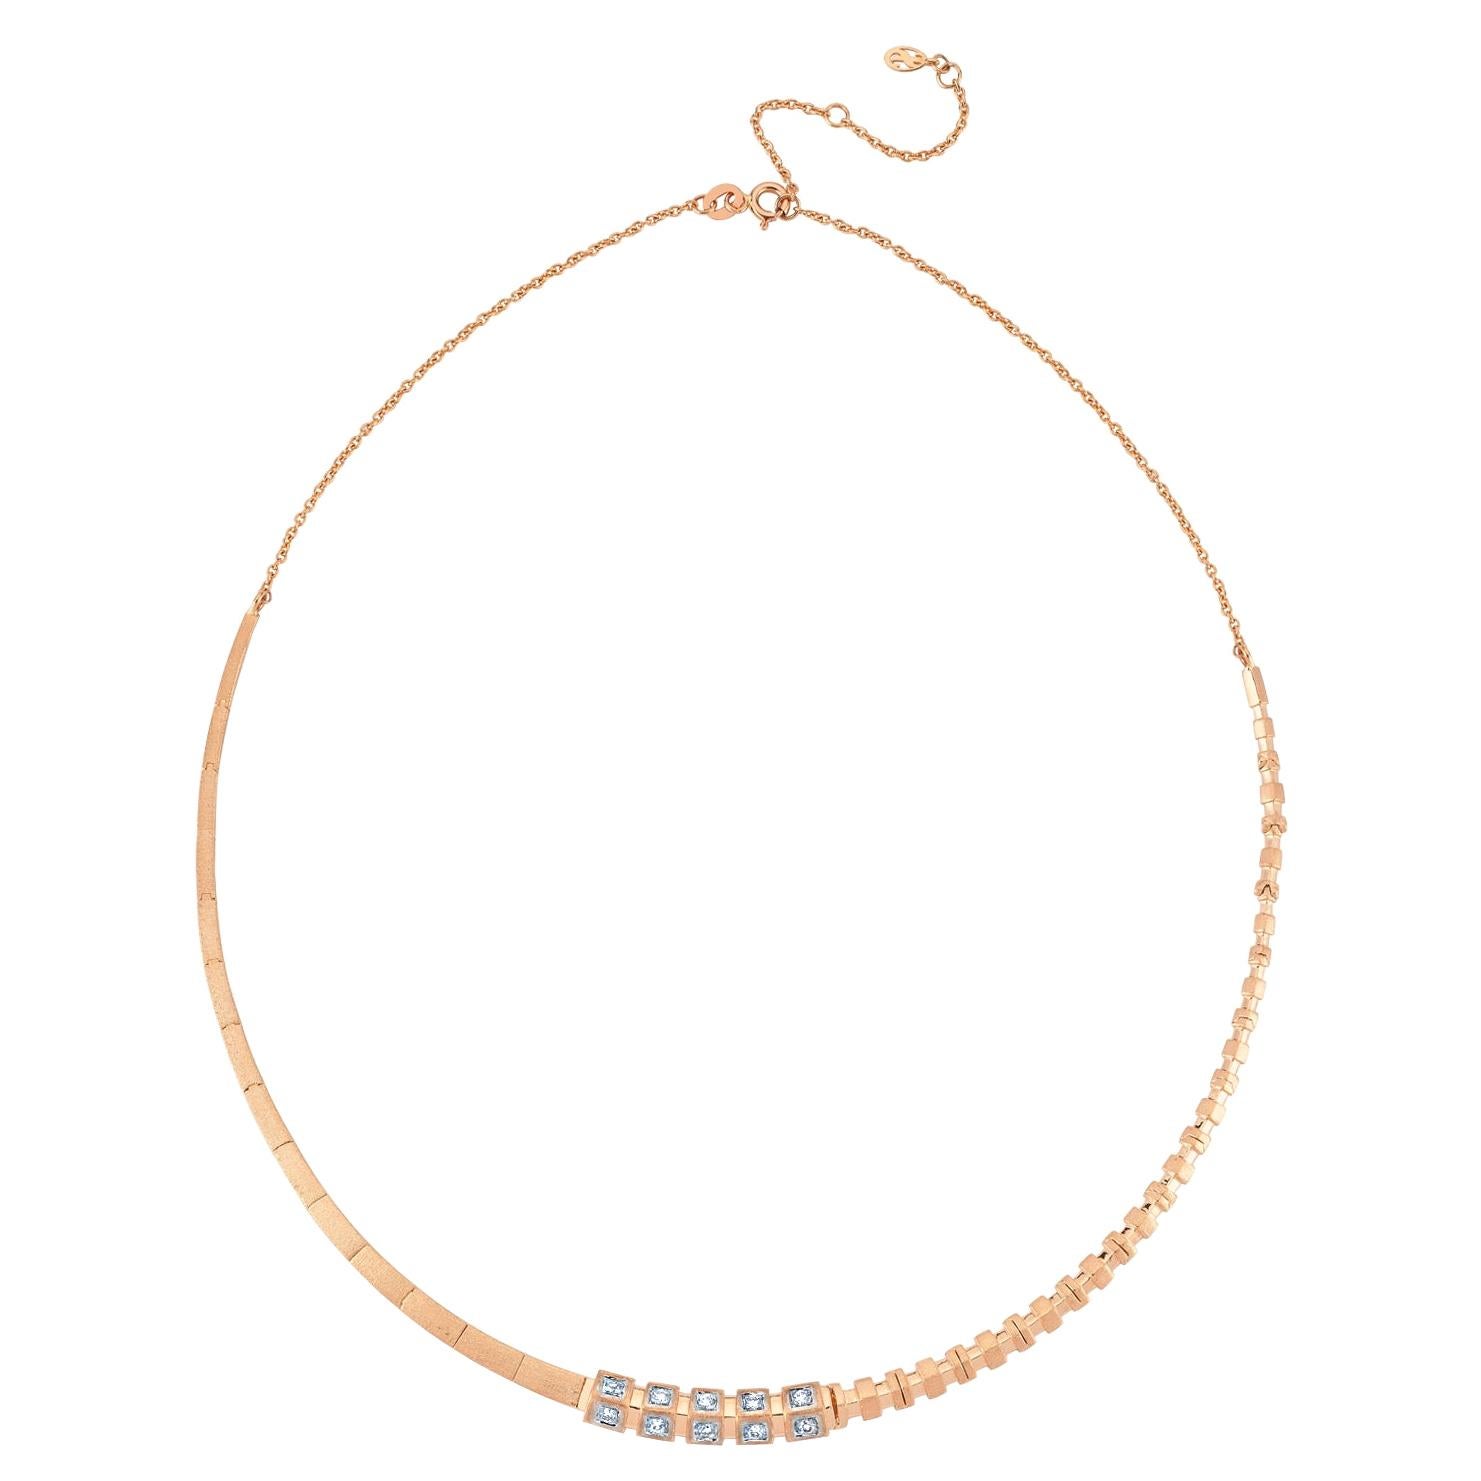 Taotie Necklace in Rose Gold with White Diamond